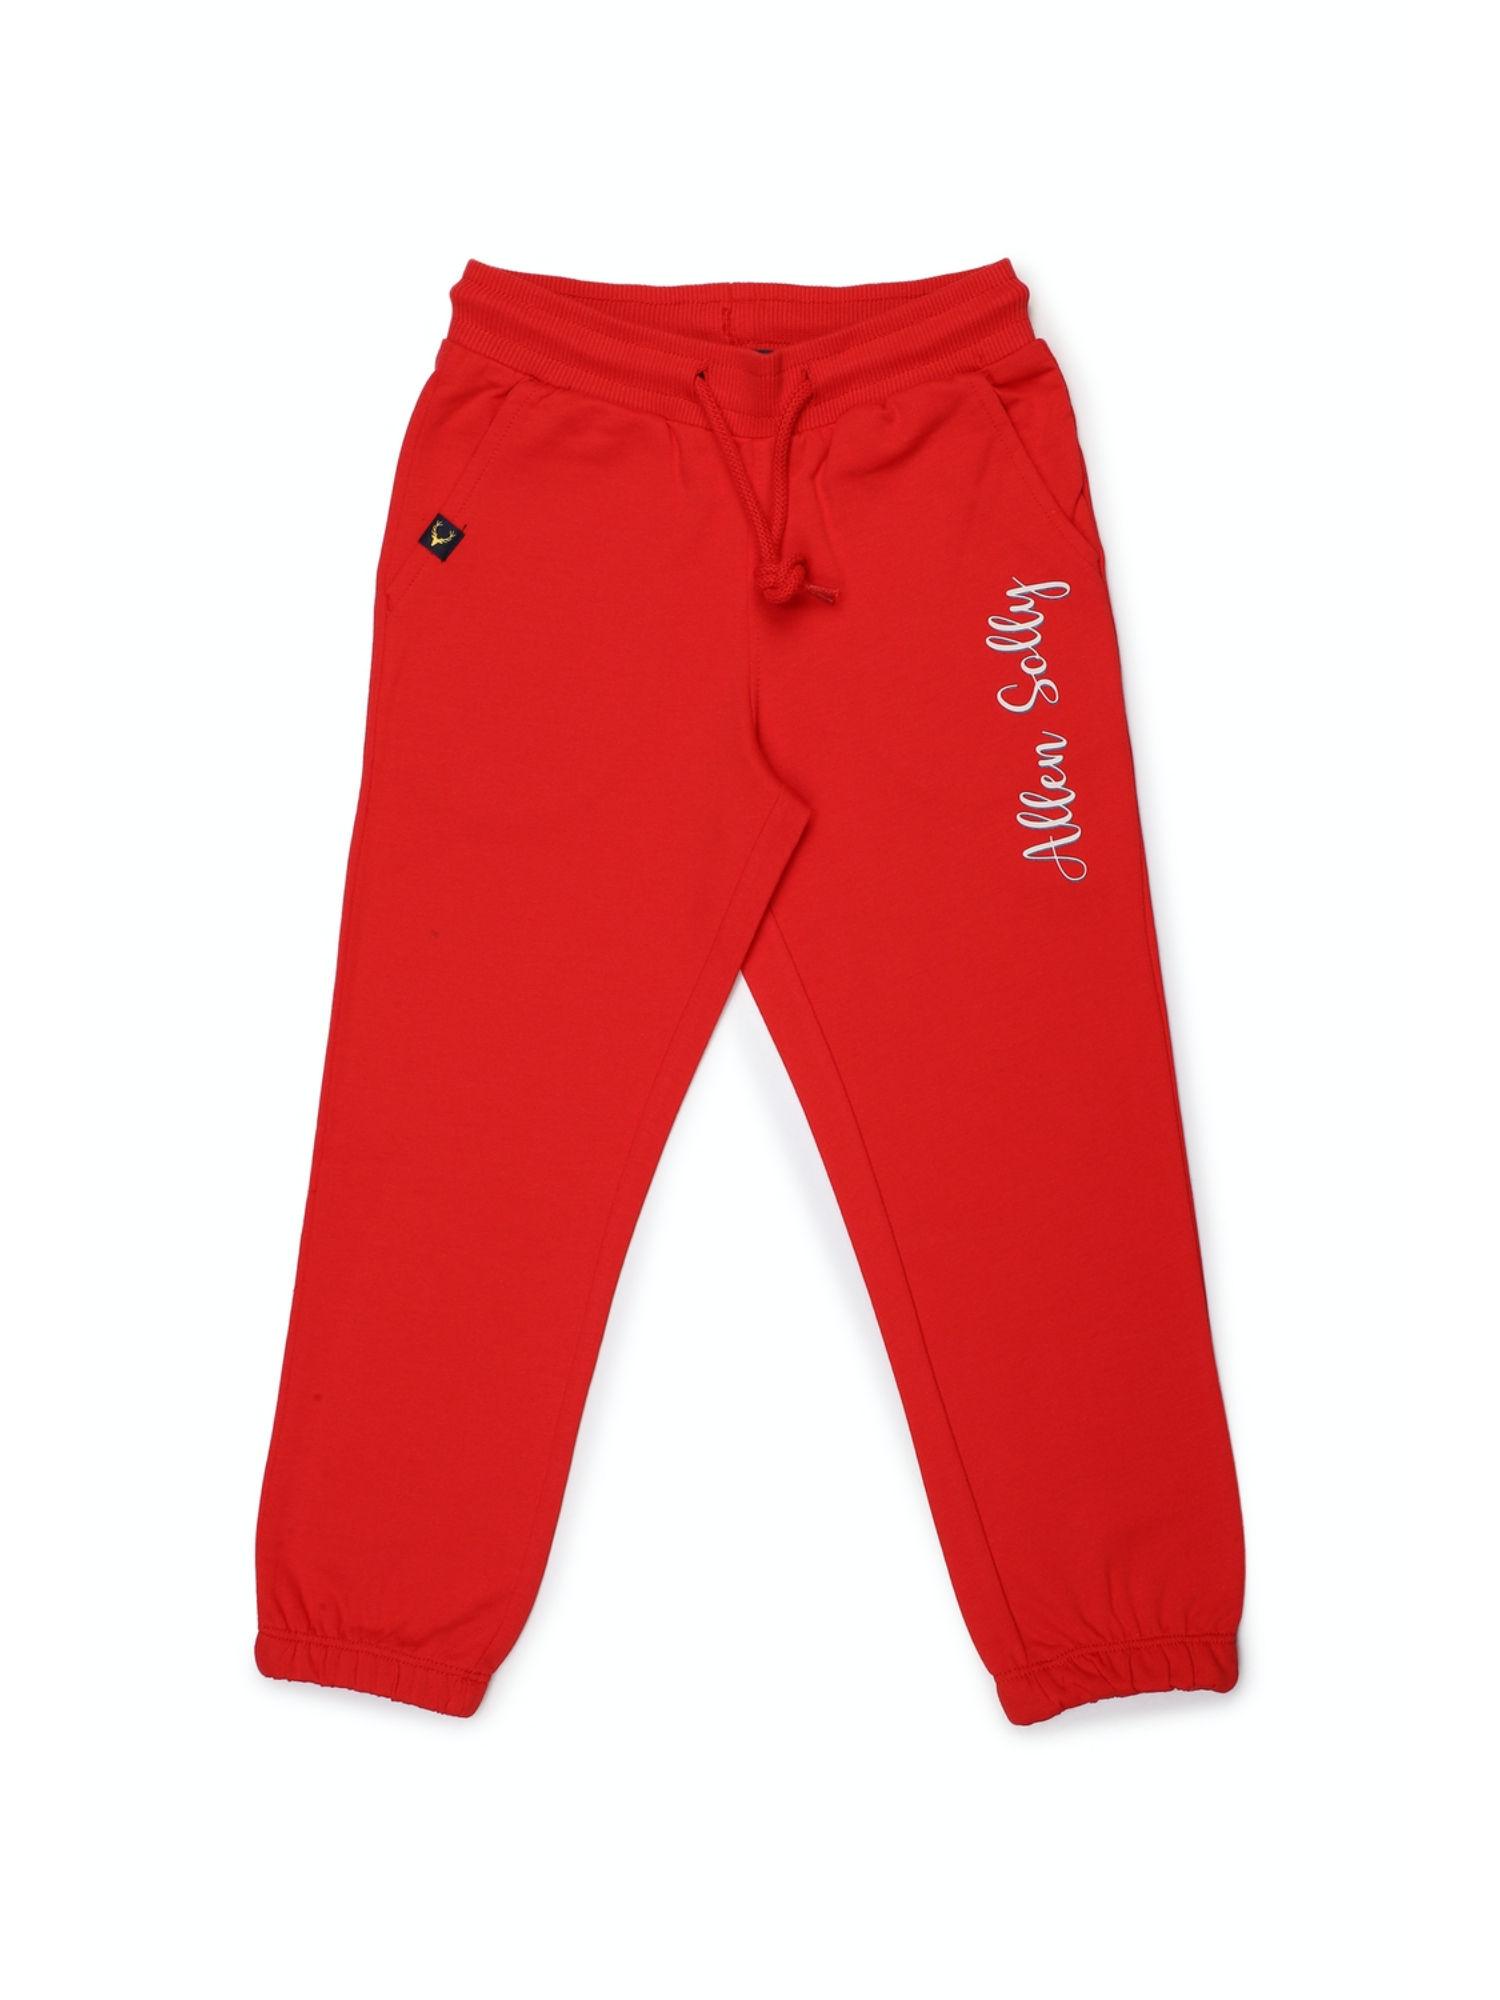 red-track-pants